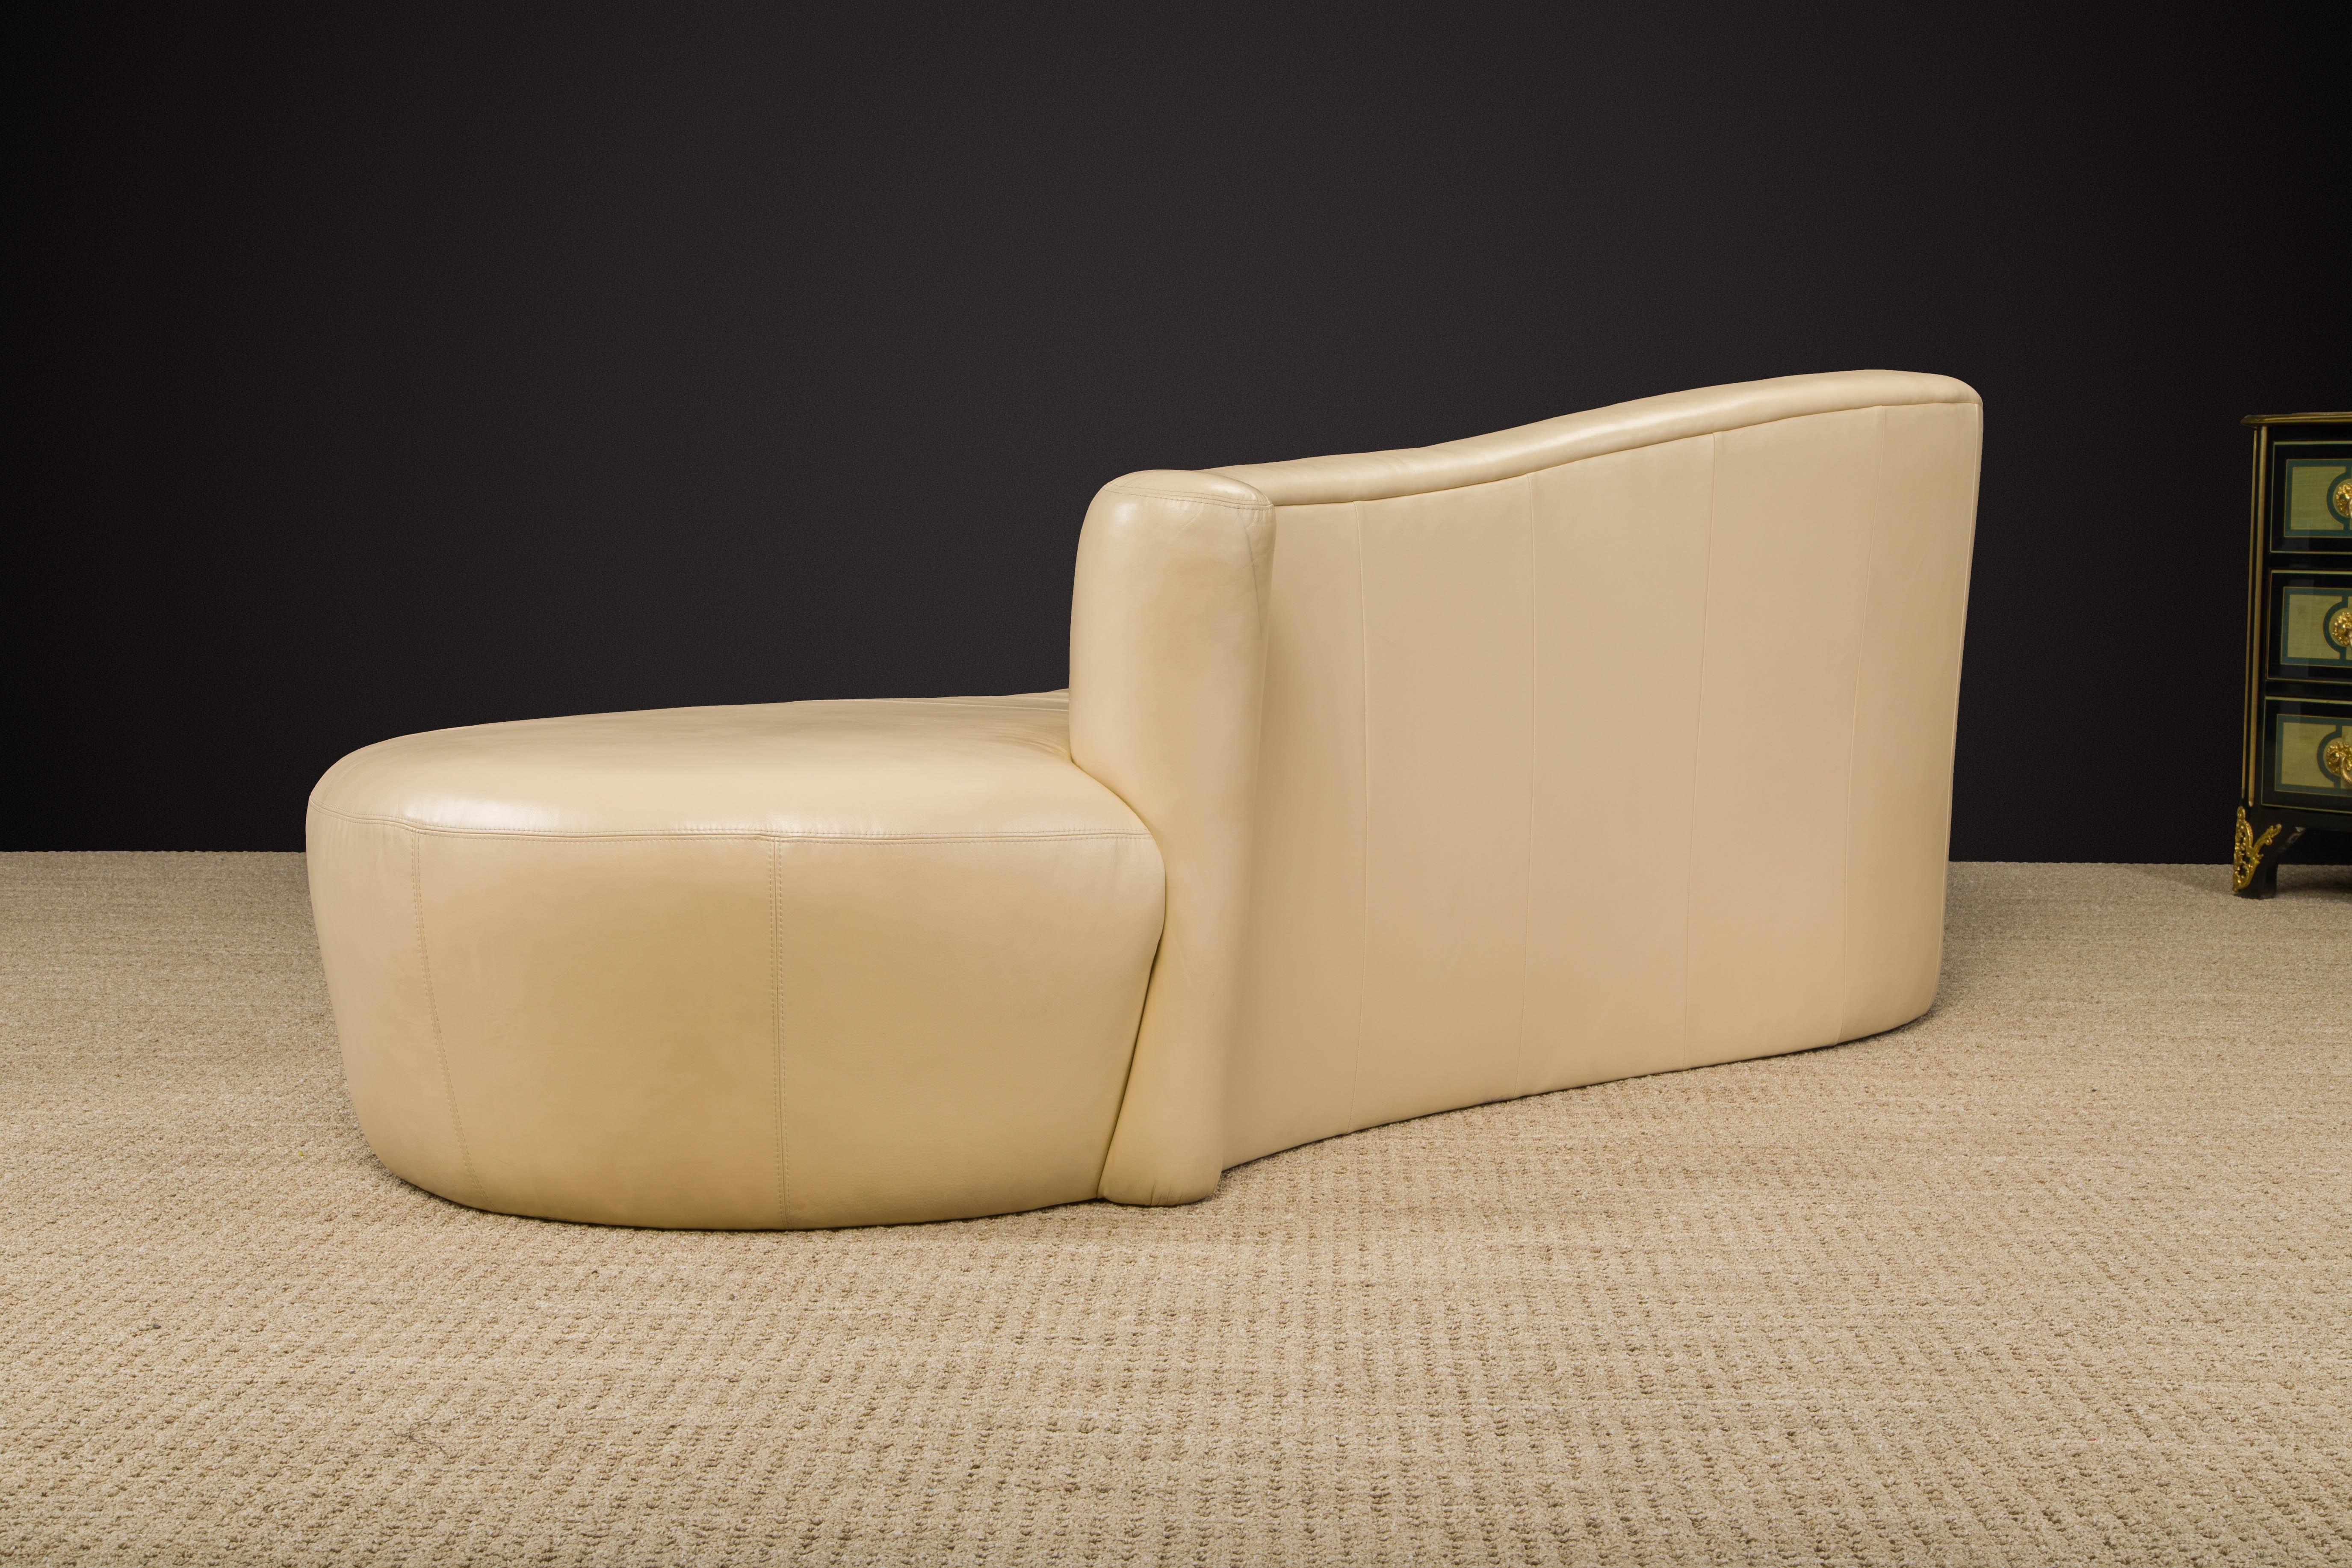 Tan Leather Cloud Style Sofa with Lucite Leg by Weiman, c 1980s, Signed For Sale 5